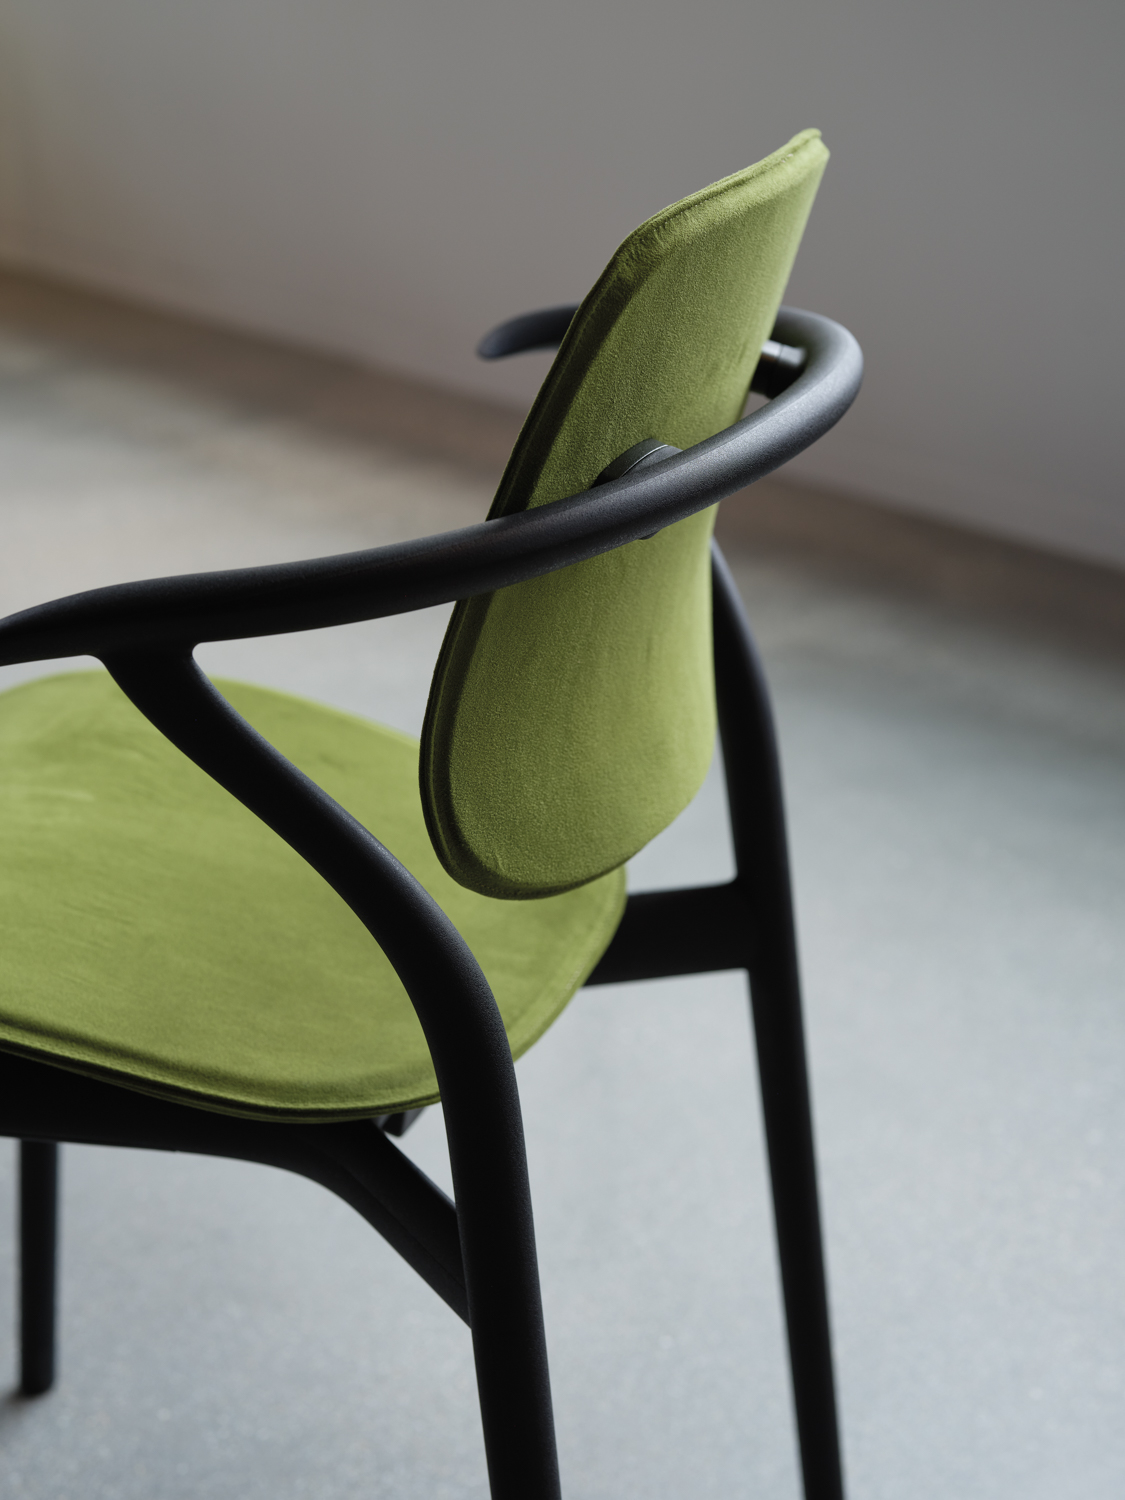 Detail shot of a green and black chair by Ini Archibong for Knoll